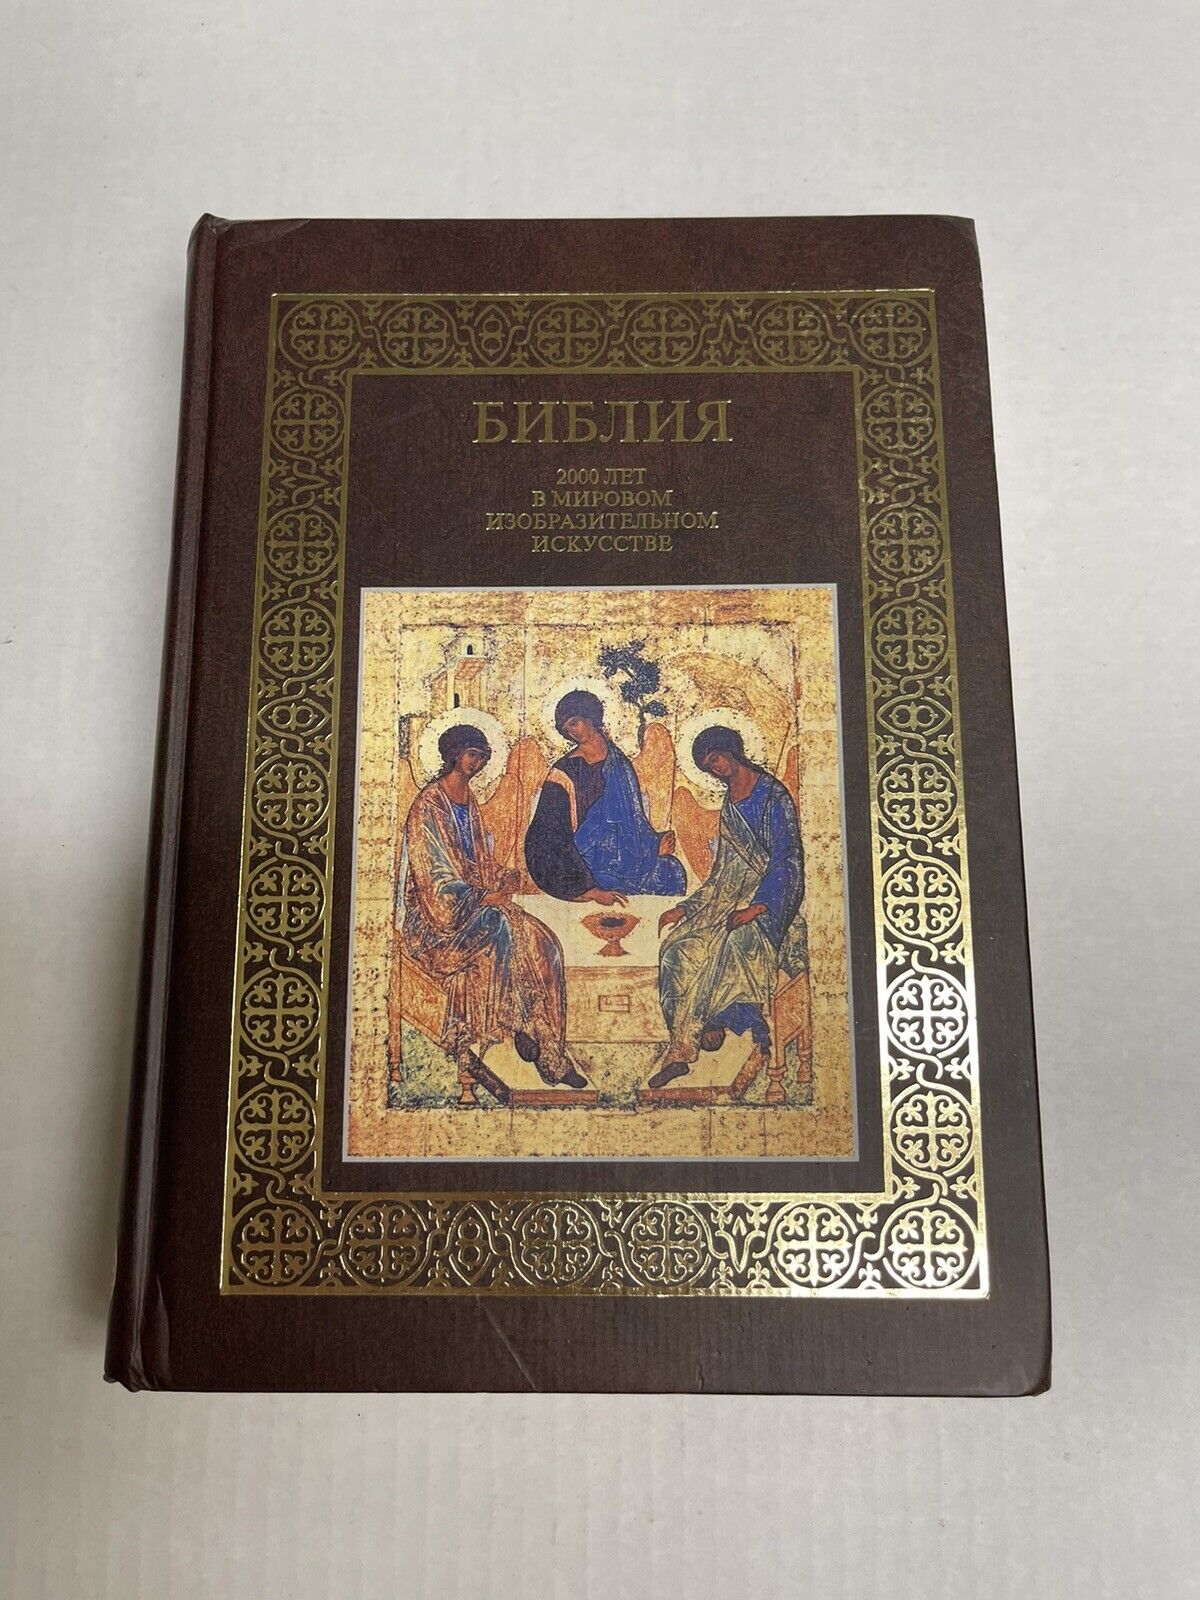 Museum exhibition catalog Russian Imperial Orthodox icons Book Holy Bible